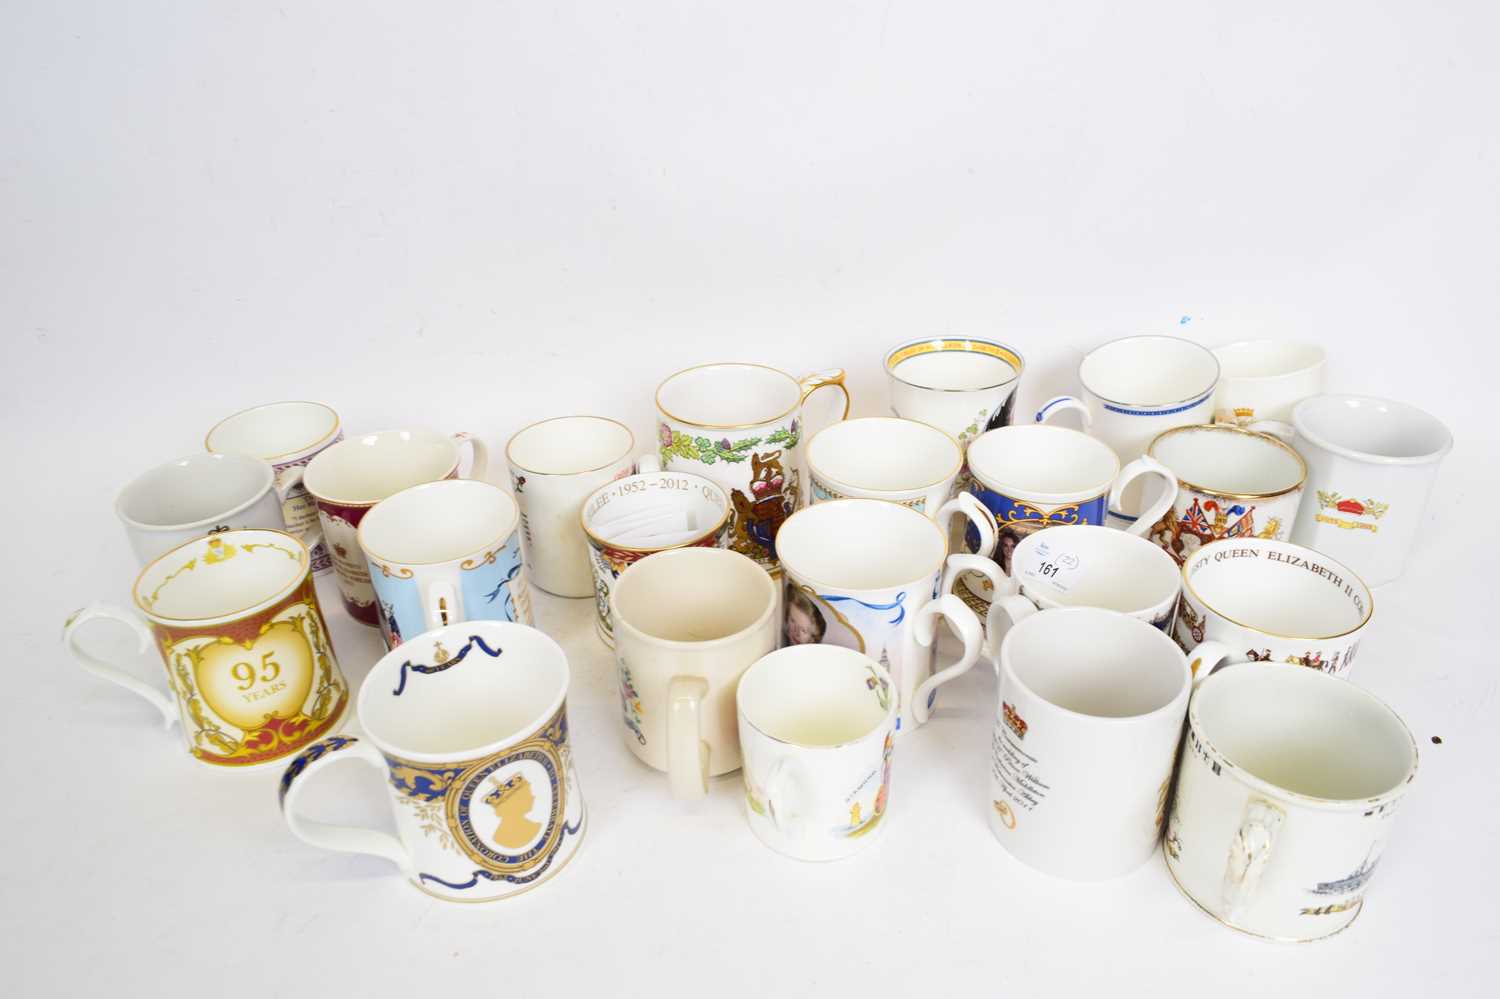 Collection of commemorative mugs, various Royalty and political figures (22)